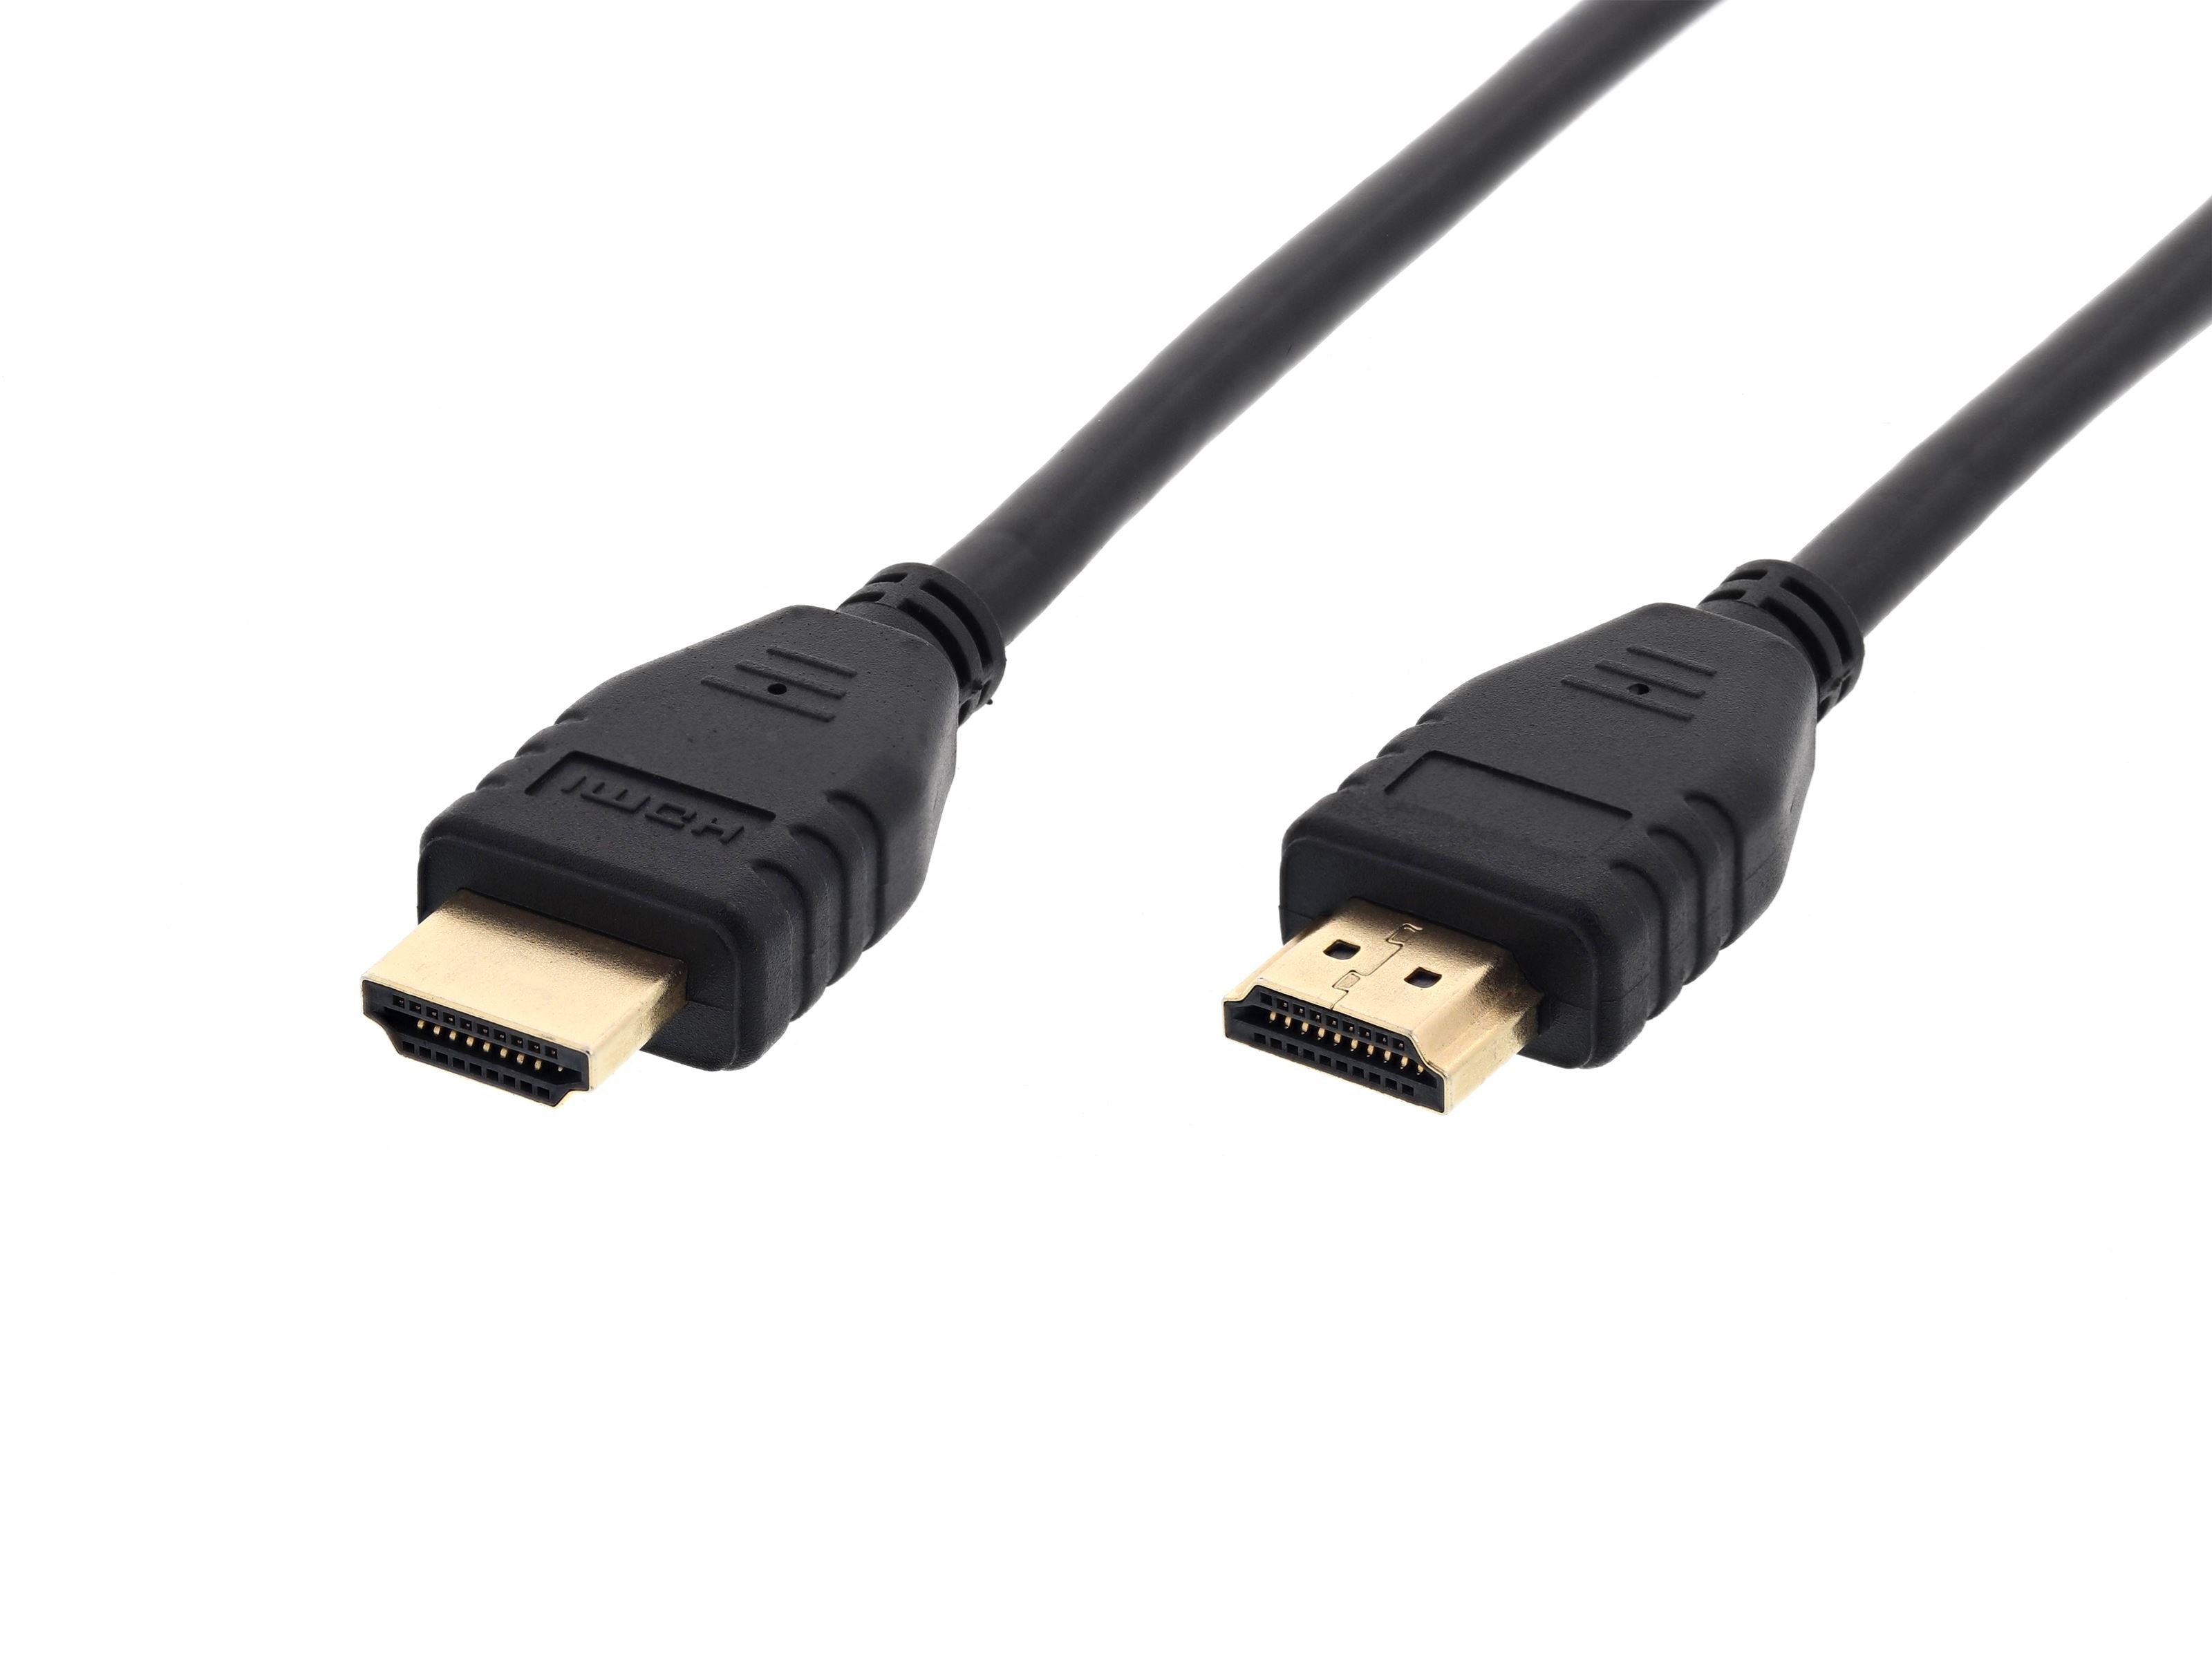 Sammenligne Tante Kina 32 FT UHD HDMI 2.0 Rdy High Speed Cable w/ Ethernet at Cables N More